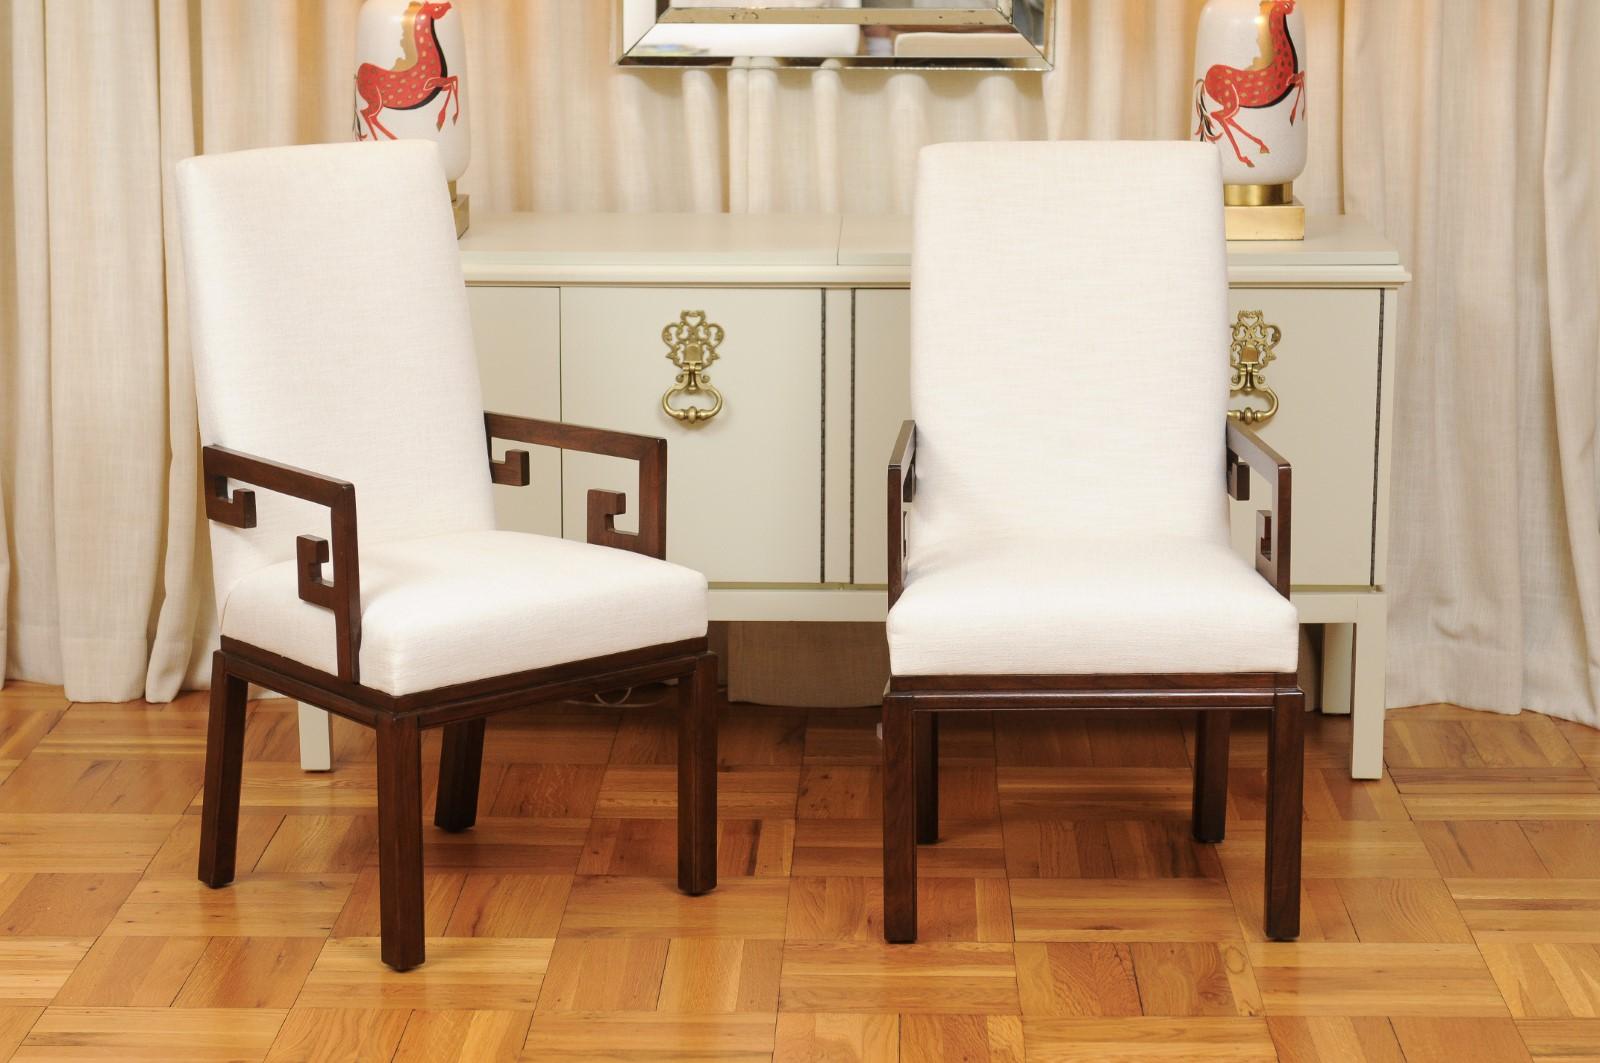 These magnificent dining chairs are shipped as professionally photographed and described in the listing narrative: completely installation ready. This all arm set is unique on the World market. Expert custom upholstery service is available.

An